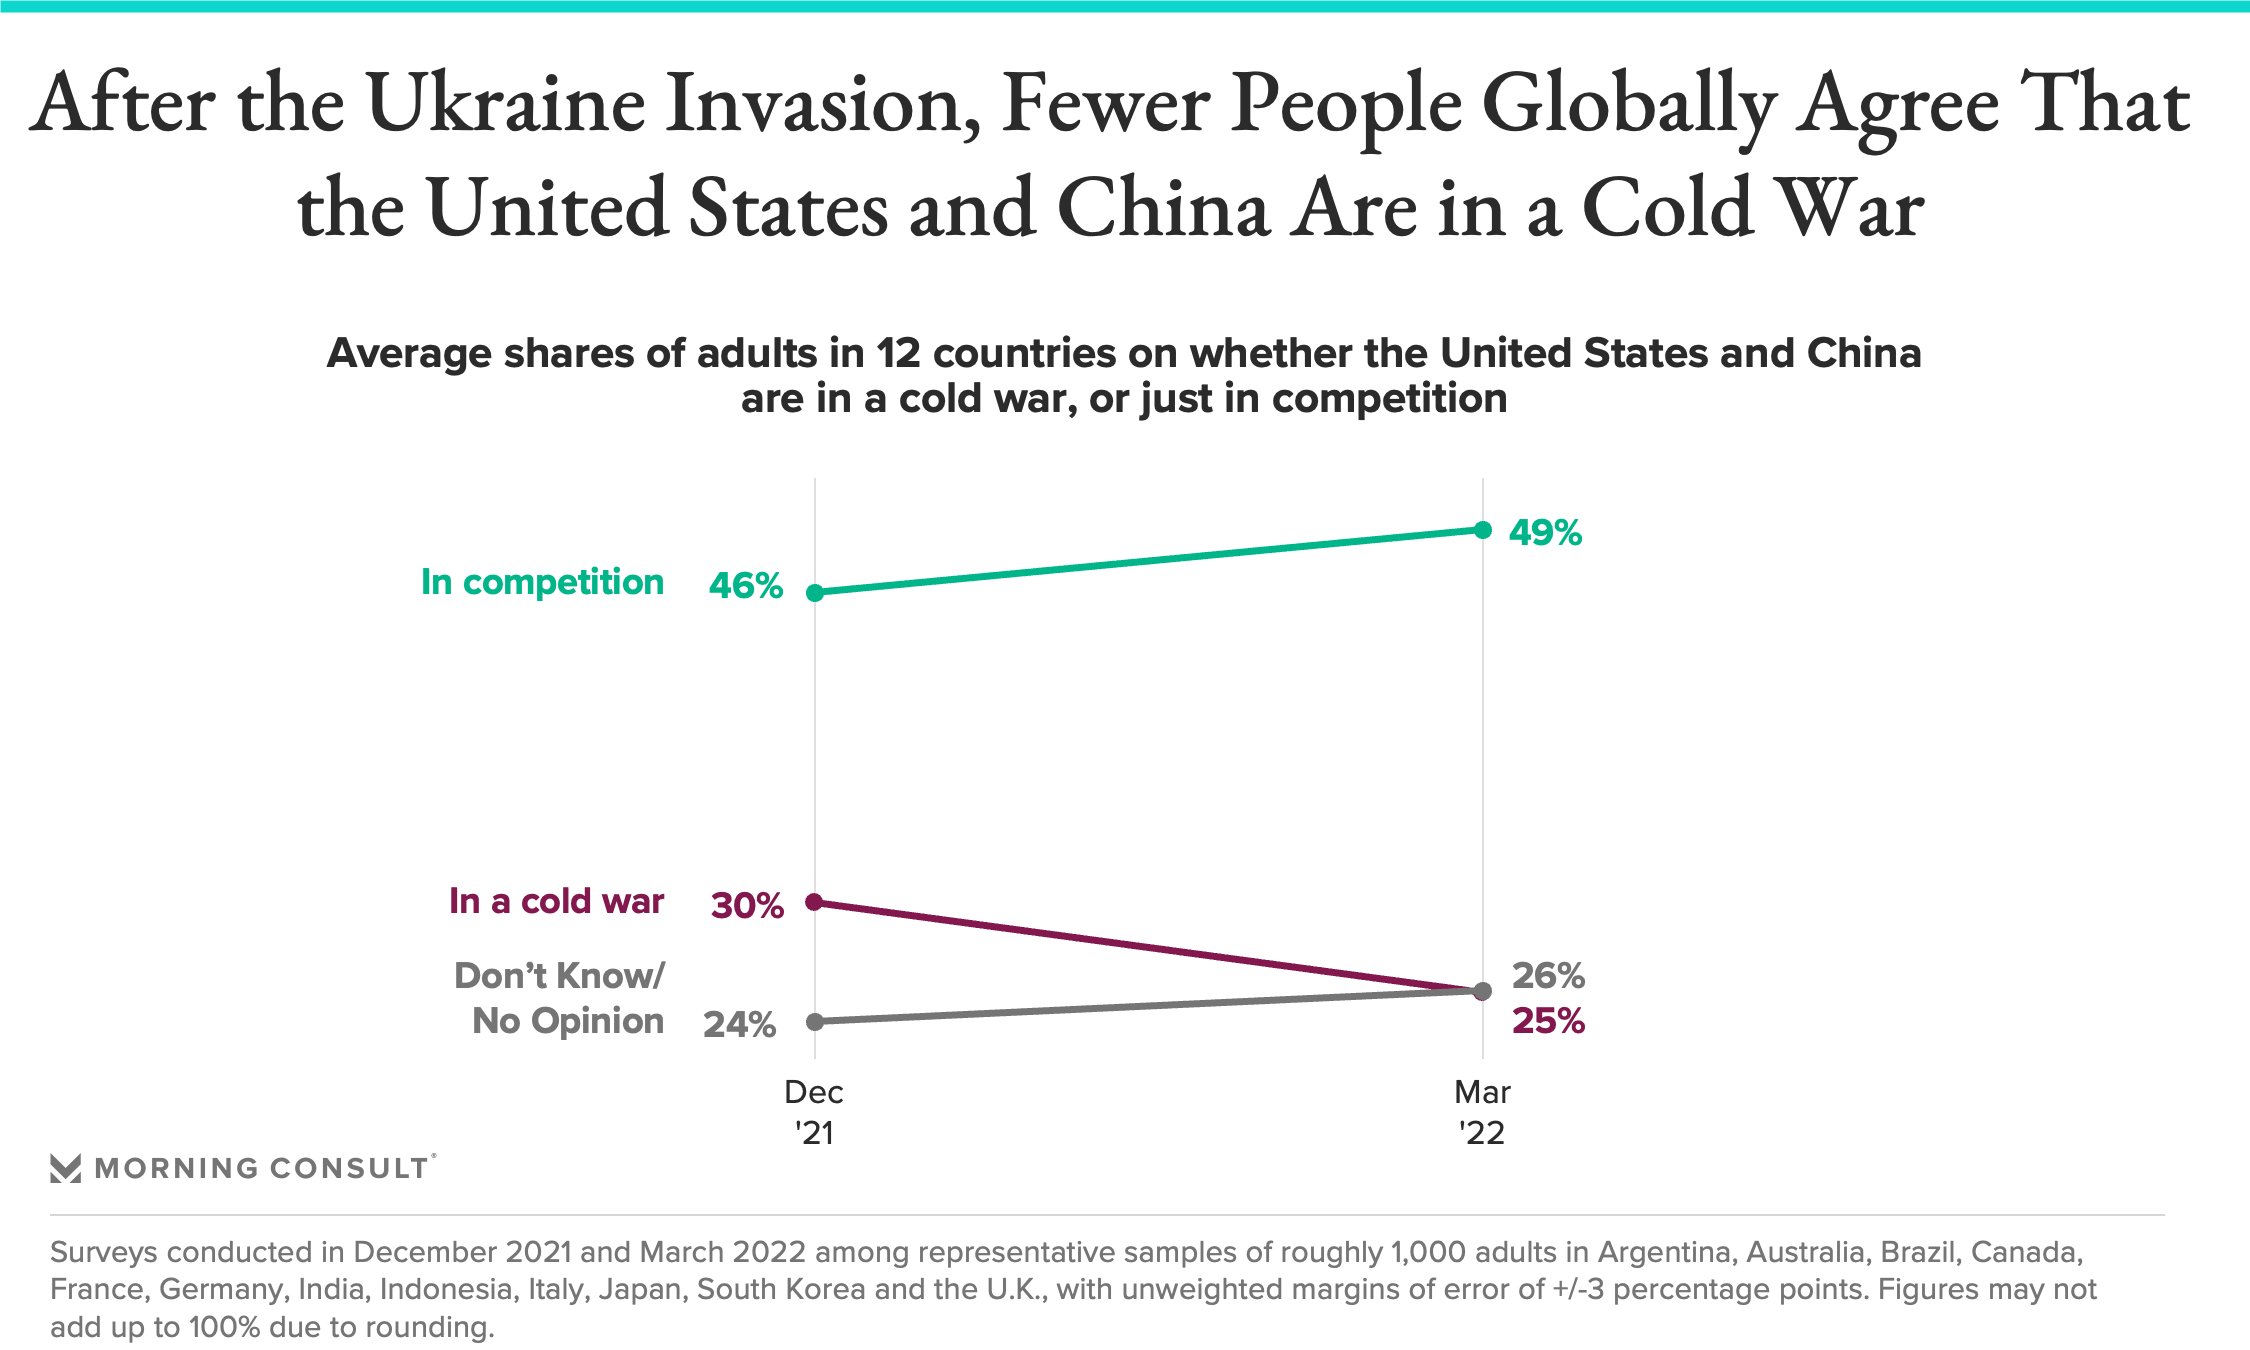 Slope charts showing average share of adults in 12 countries on whether the U.S. and China are in a cold war or just a competition